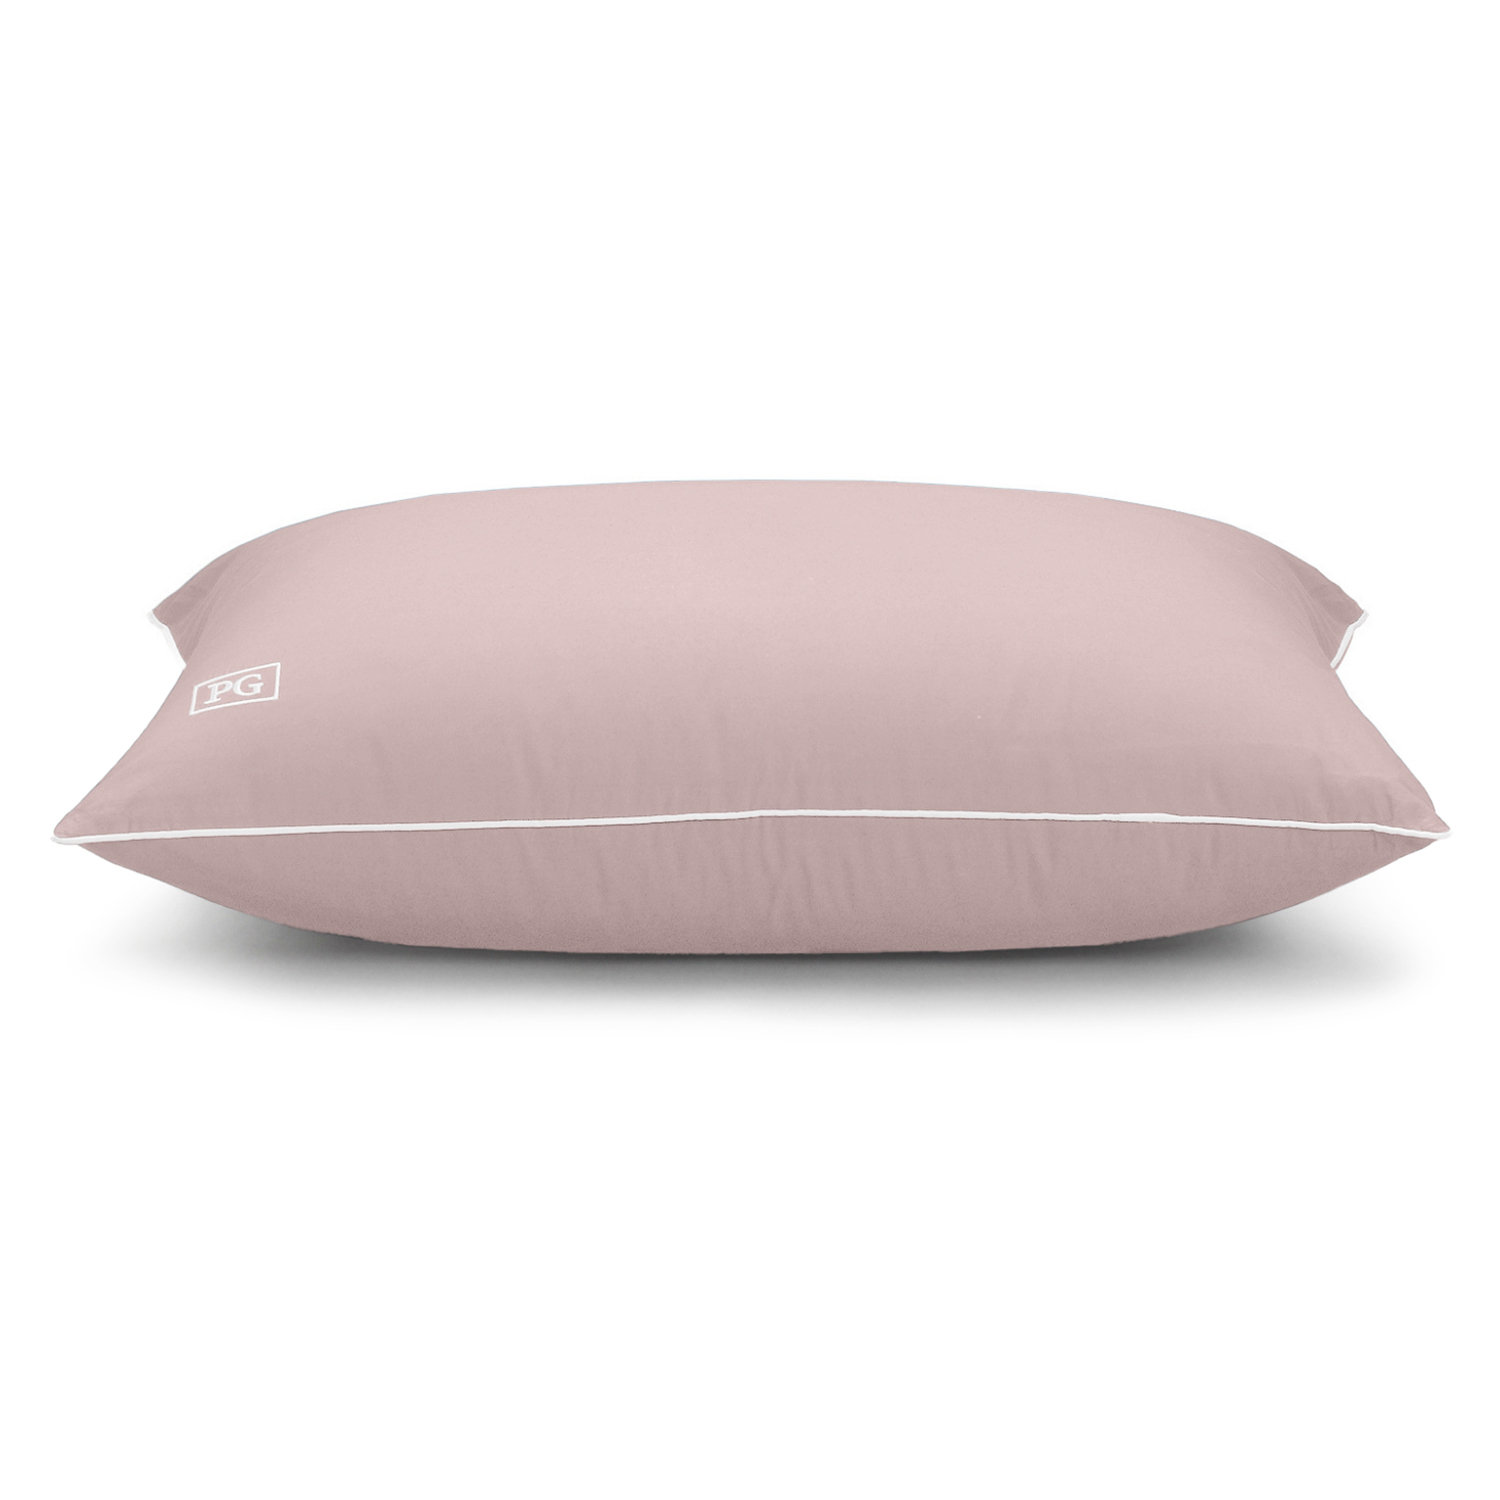 Cotton Blend Superior Down-like Soft Stomach Sleeper King Pillow - Set of 2